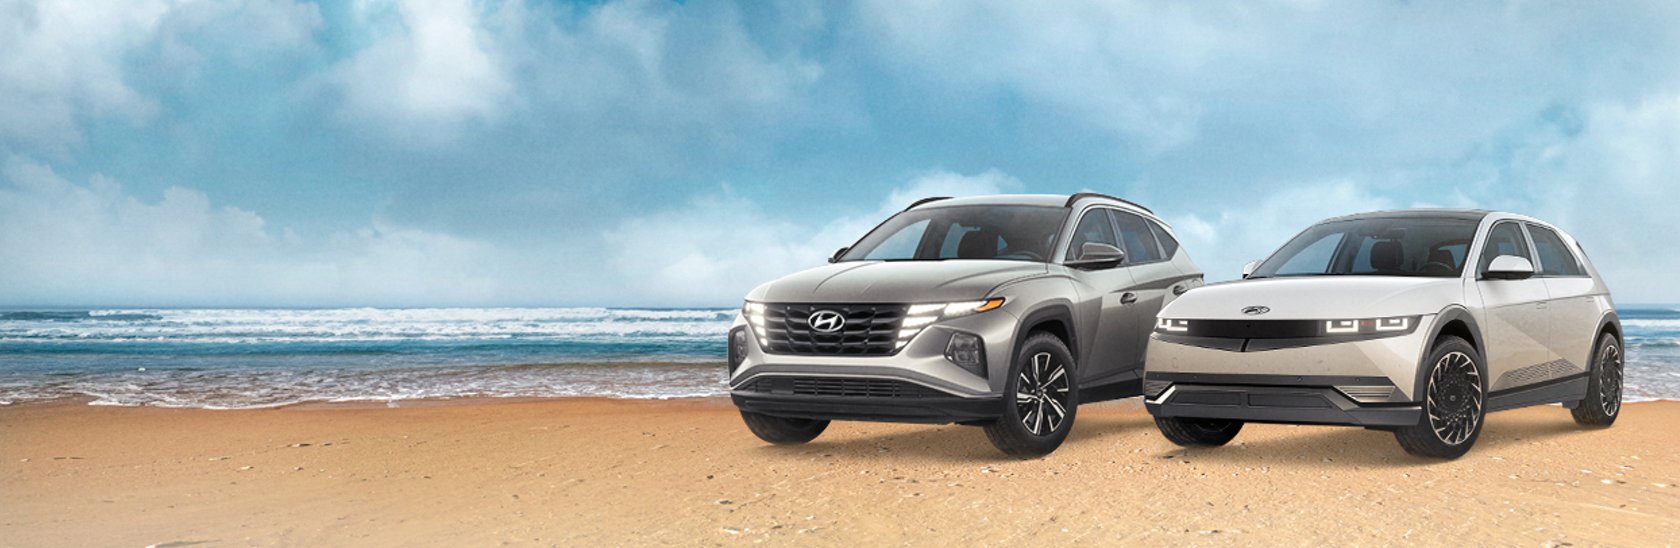 Aloha Hyundai Program For a limited time, get a complimentary two-day rental on a TUCSON Hybrid or IONIQ 5.